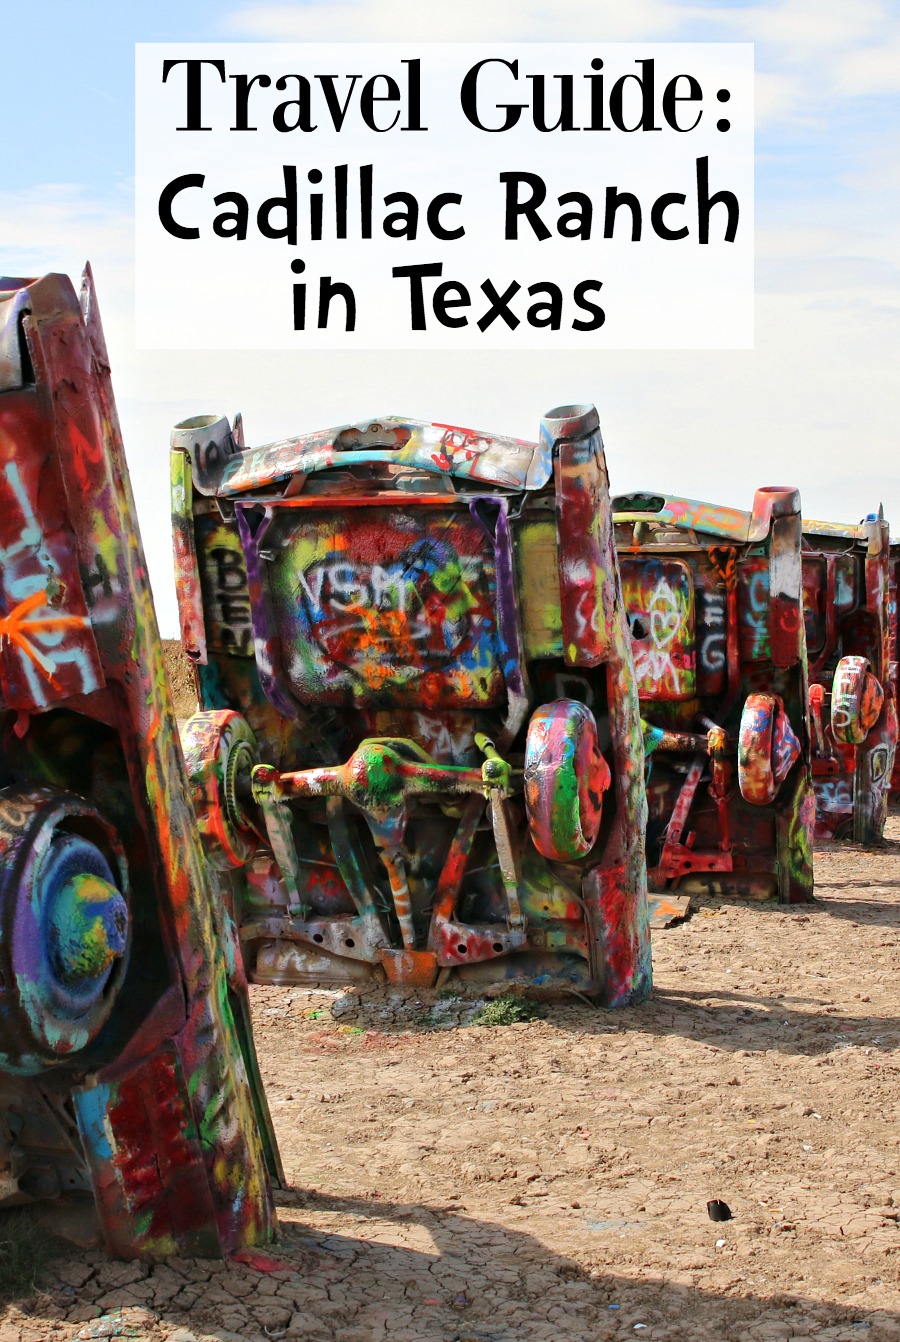 Travel Guide Cadillac Ranch in Texas